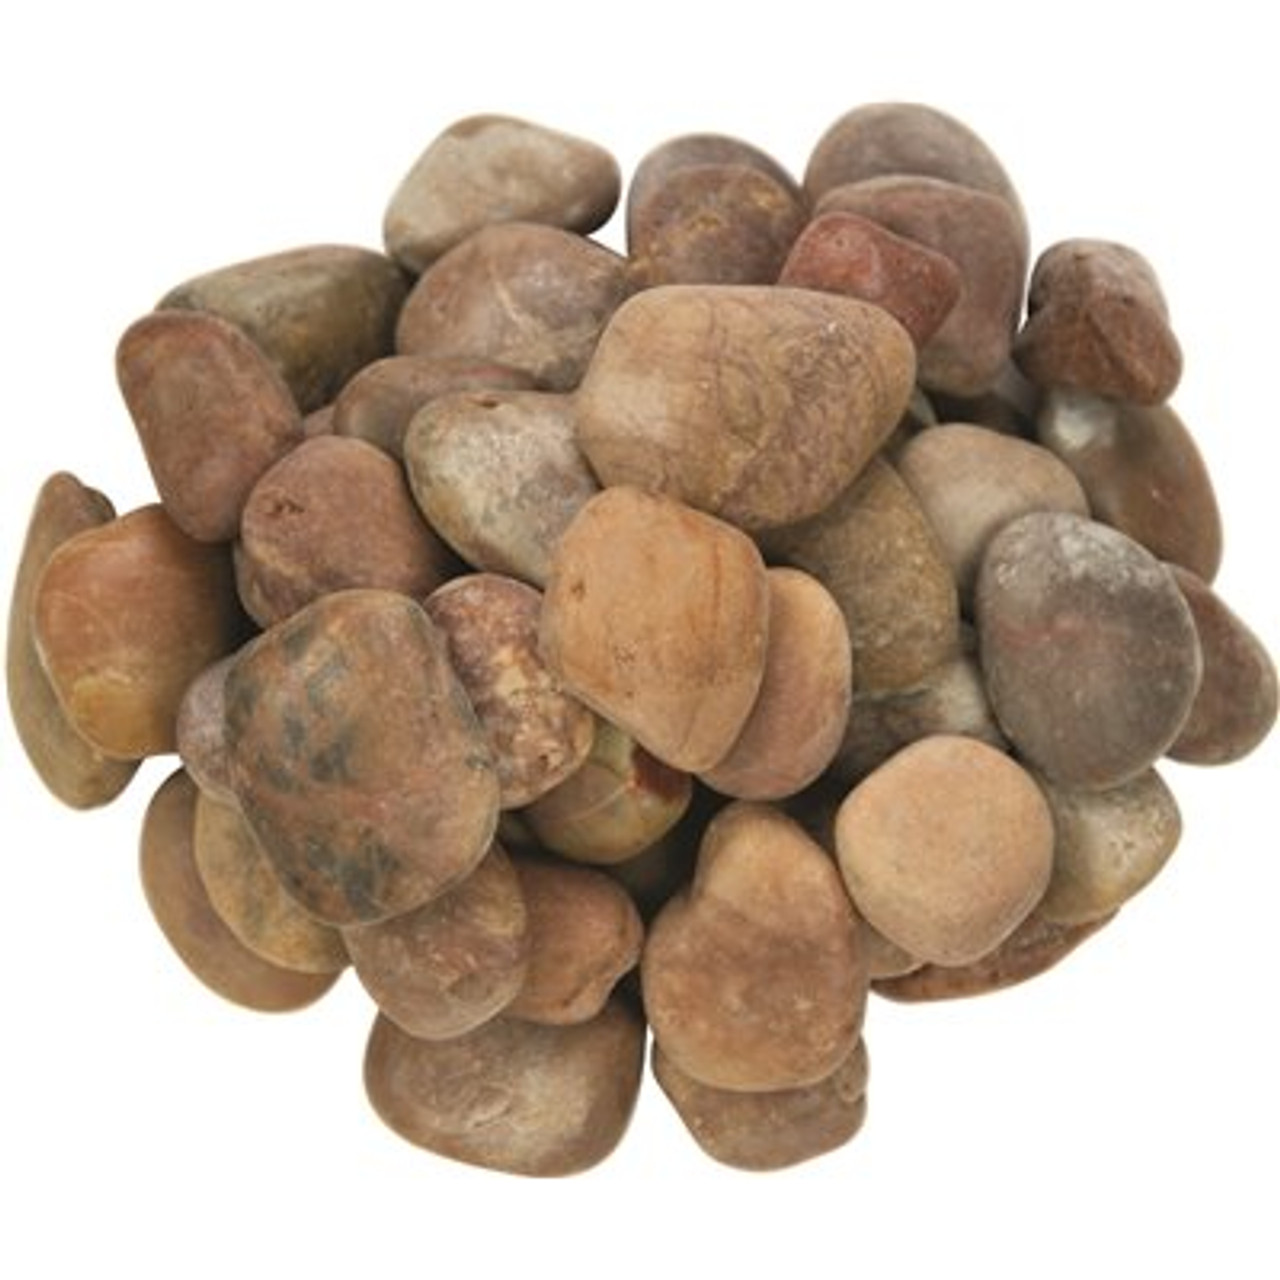 Msi Red Polished Pebbles 0.5 Cu. Ft . Per Bag (0.75 In. To 1.25 In.) Bagged Landscape Rock (28 Bags / Covers 14 Cu. Ft.)